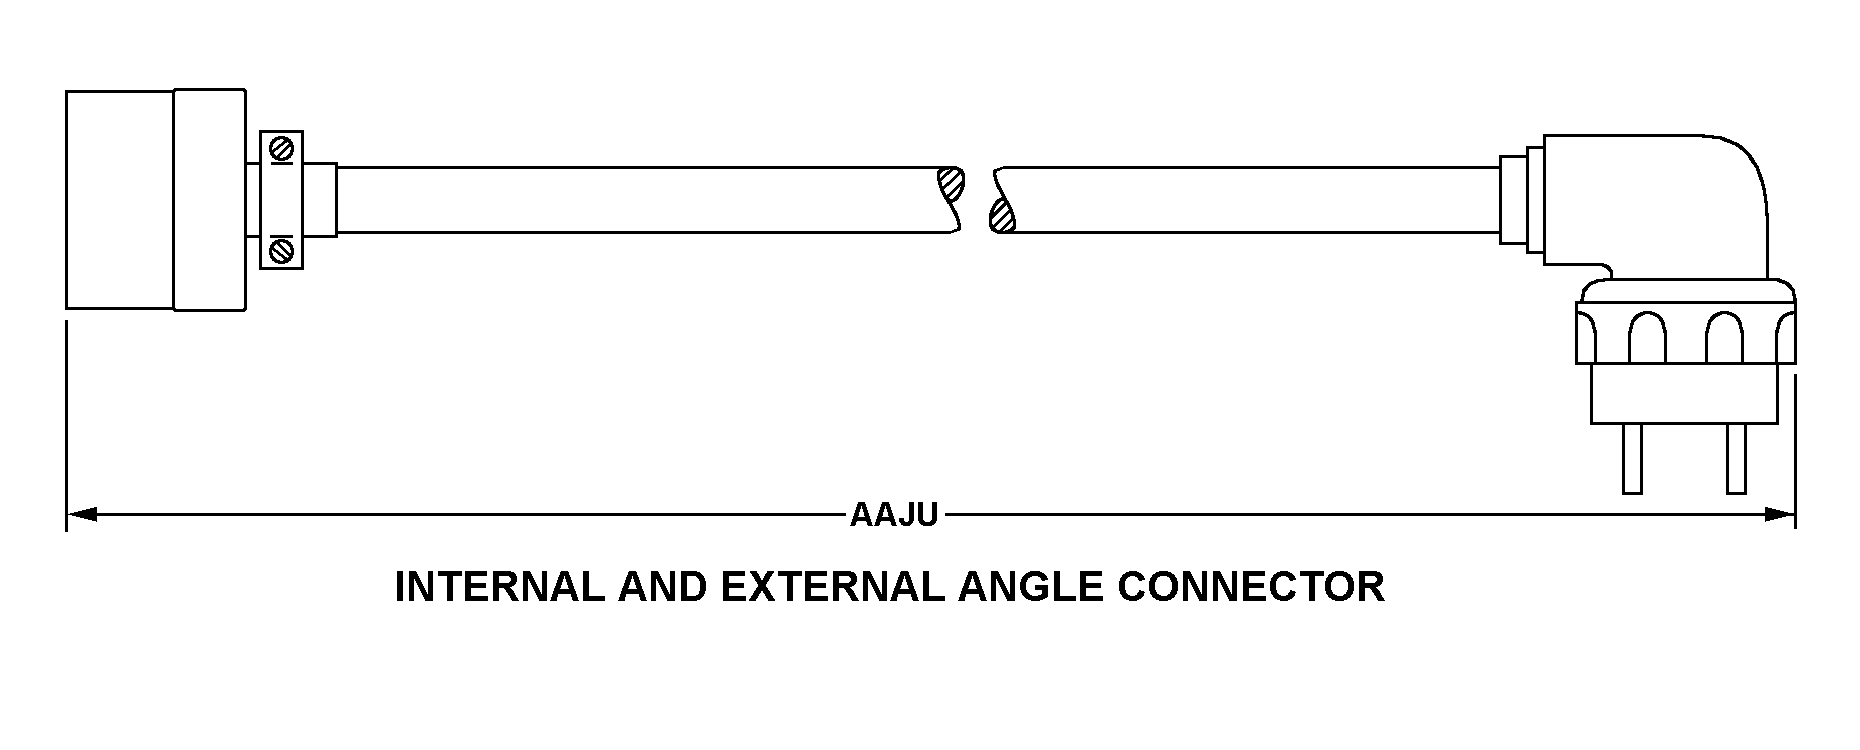 INTERNAL AND EXTERNAL ANGLE CONNECTOR style nsn 5995-01-073-6774